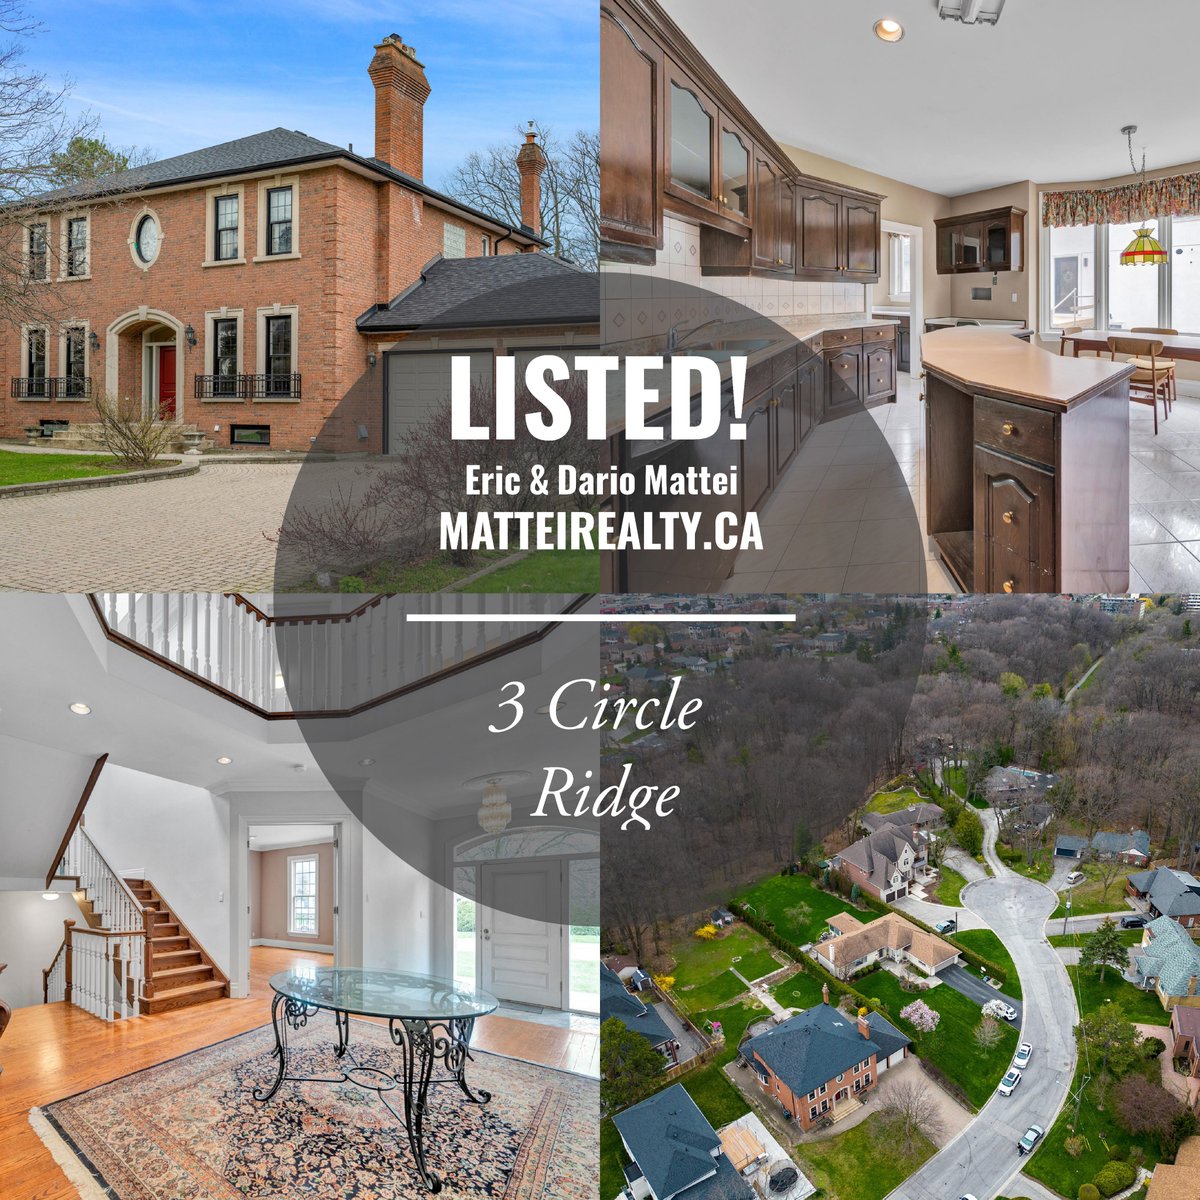 (((LISTED!!!))) 3 CIRCLE RIDGE - MLS W8272852 - INCREDIBLE CUSTOM BUILT TORONTO HOME ON A PREMIUM 75x349ft LOT!

$2,699,000

matteirealty.ca/Residential/Fo…

Eric and Dario Mattei, Brokers 
Royal LePage Terrequity Realty, Brokerage

#circleridge, #circle, #ridge, #custombuilt, #home,